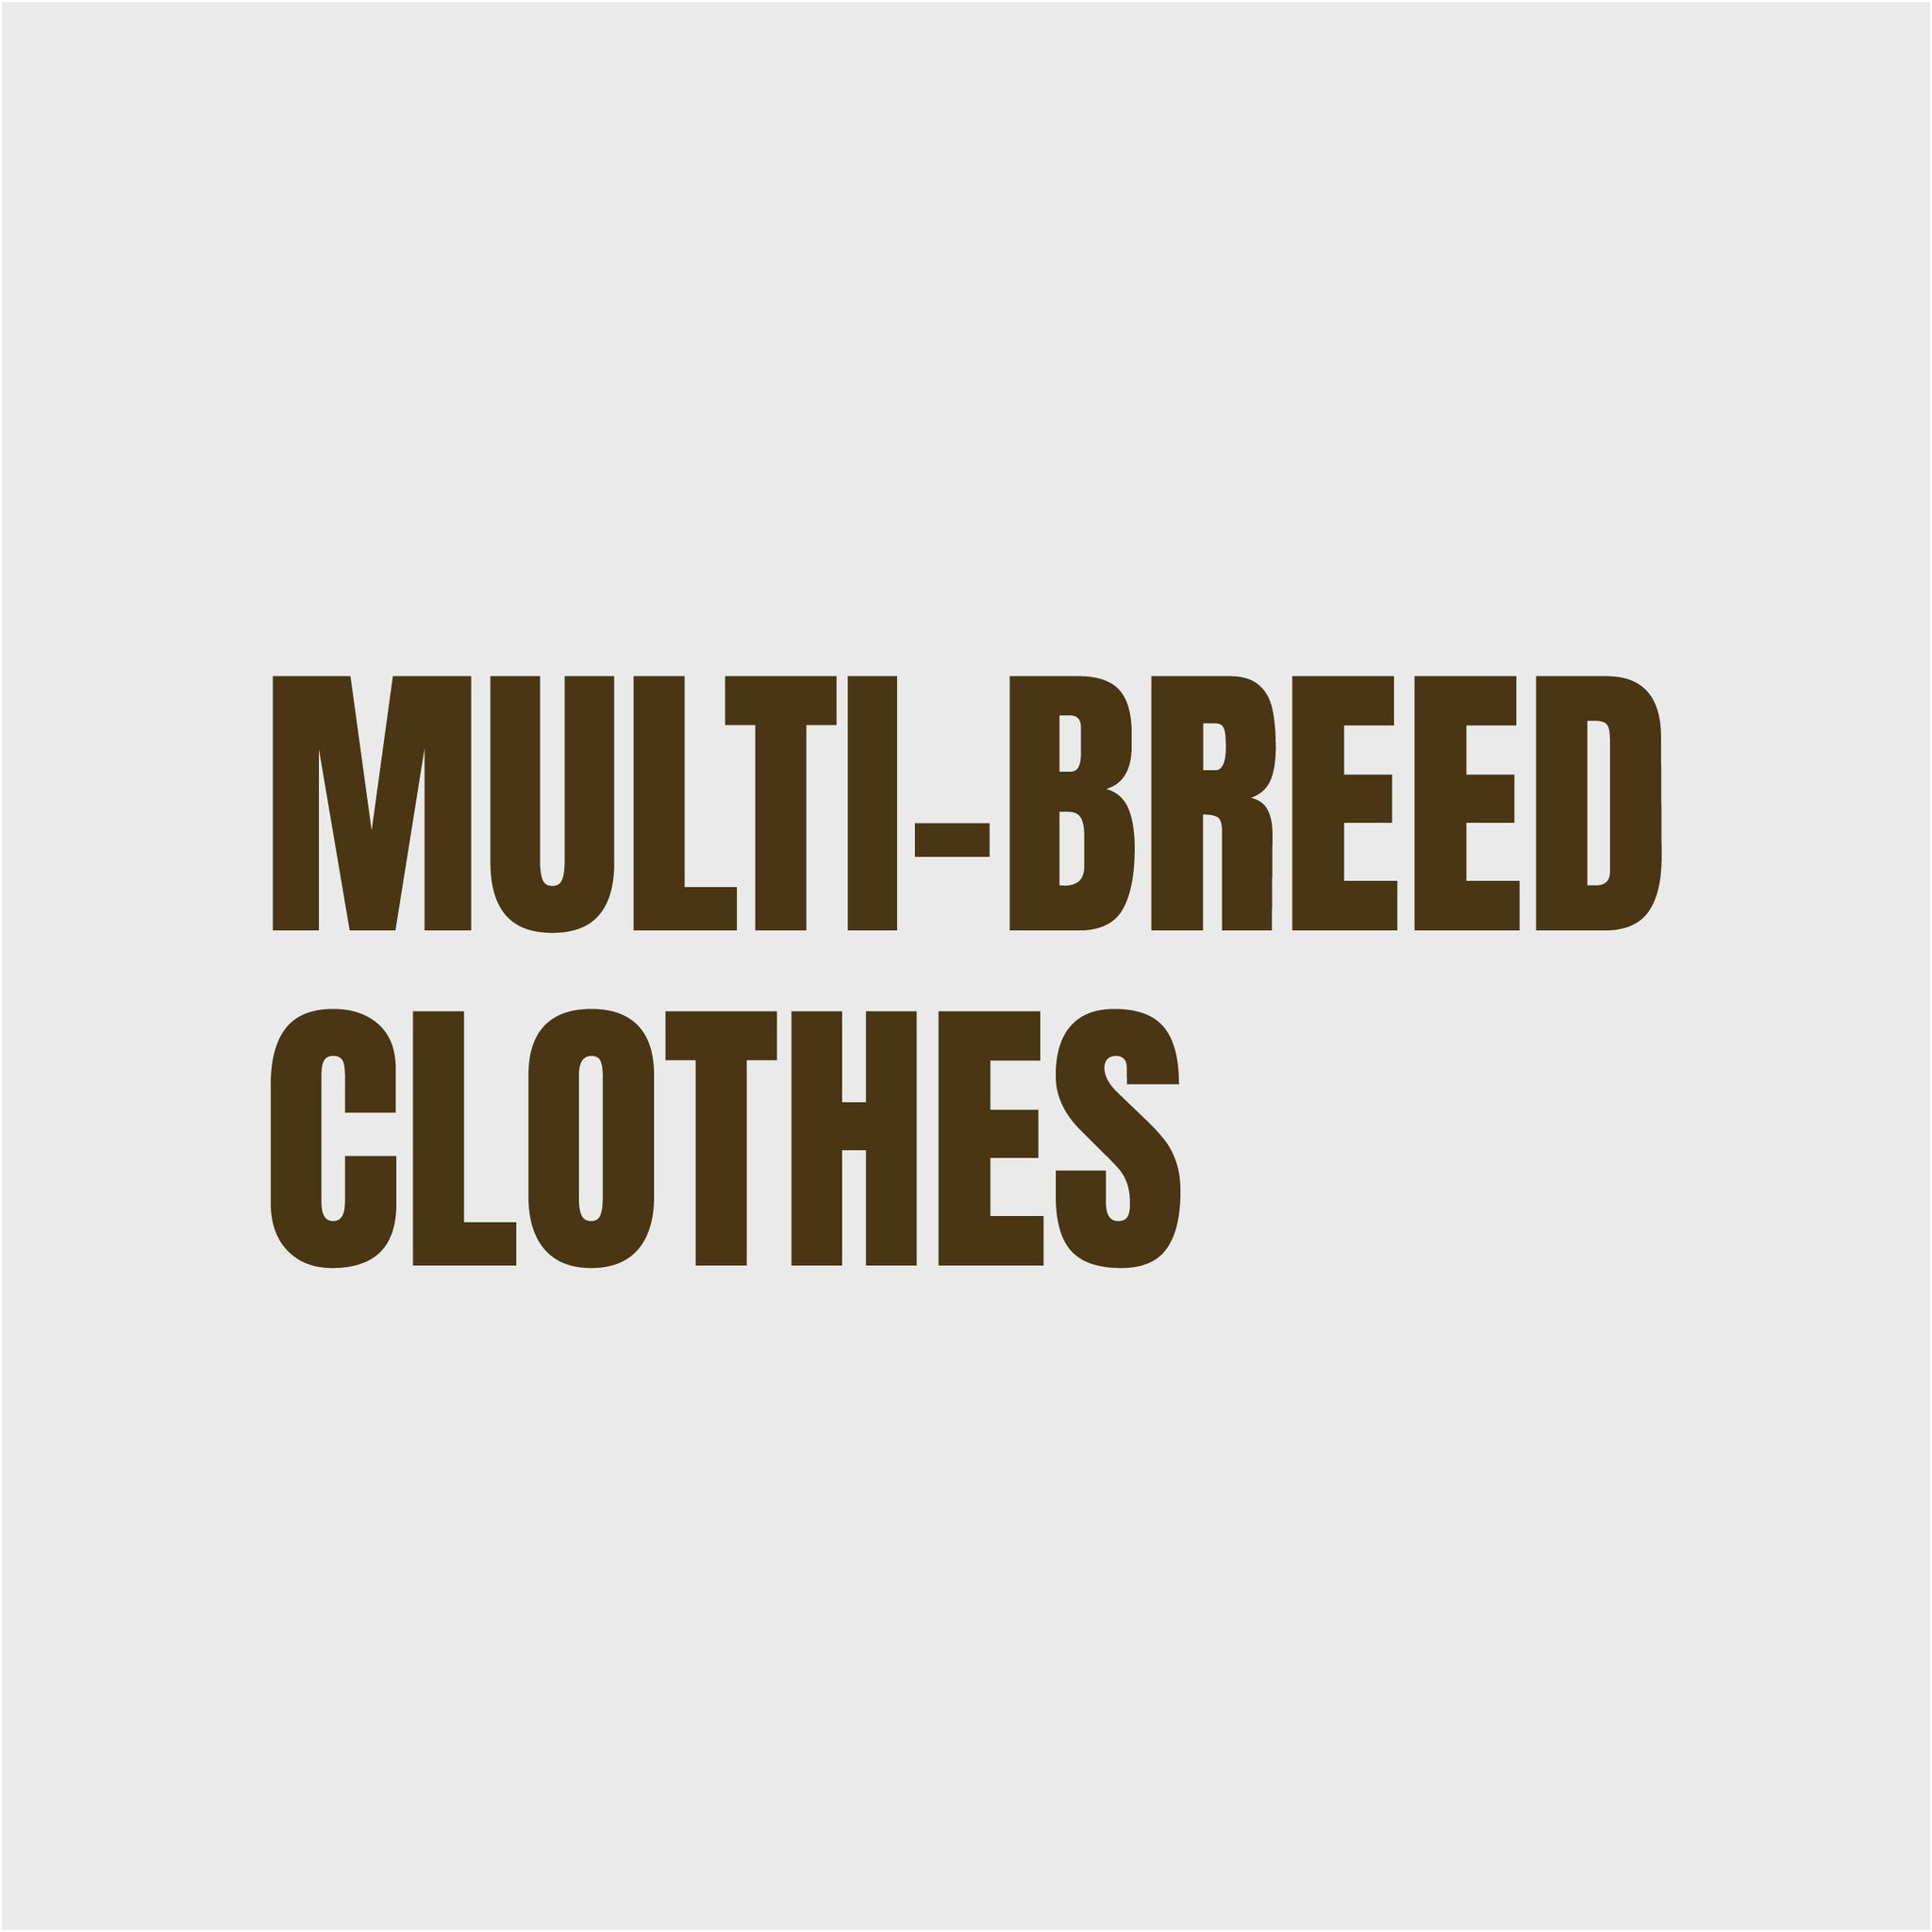 MULTI-BREED CLOTHES